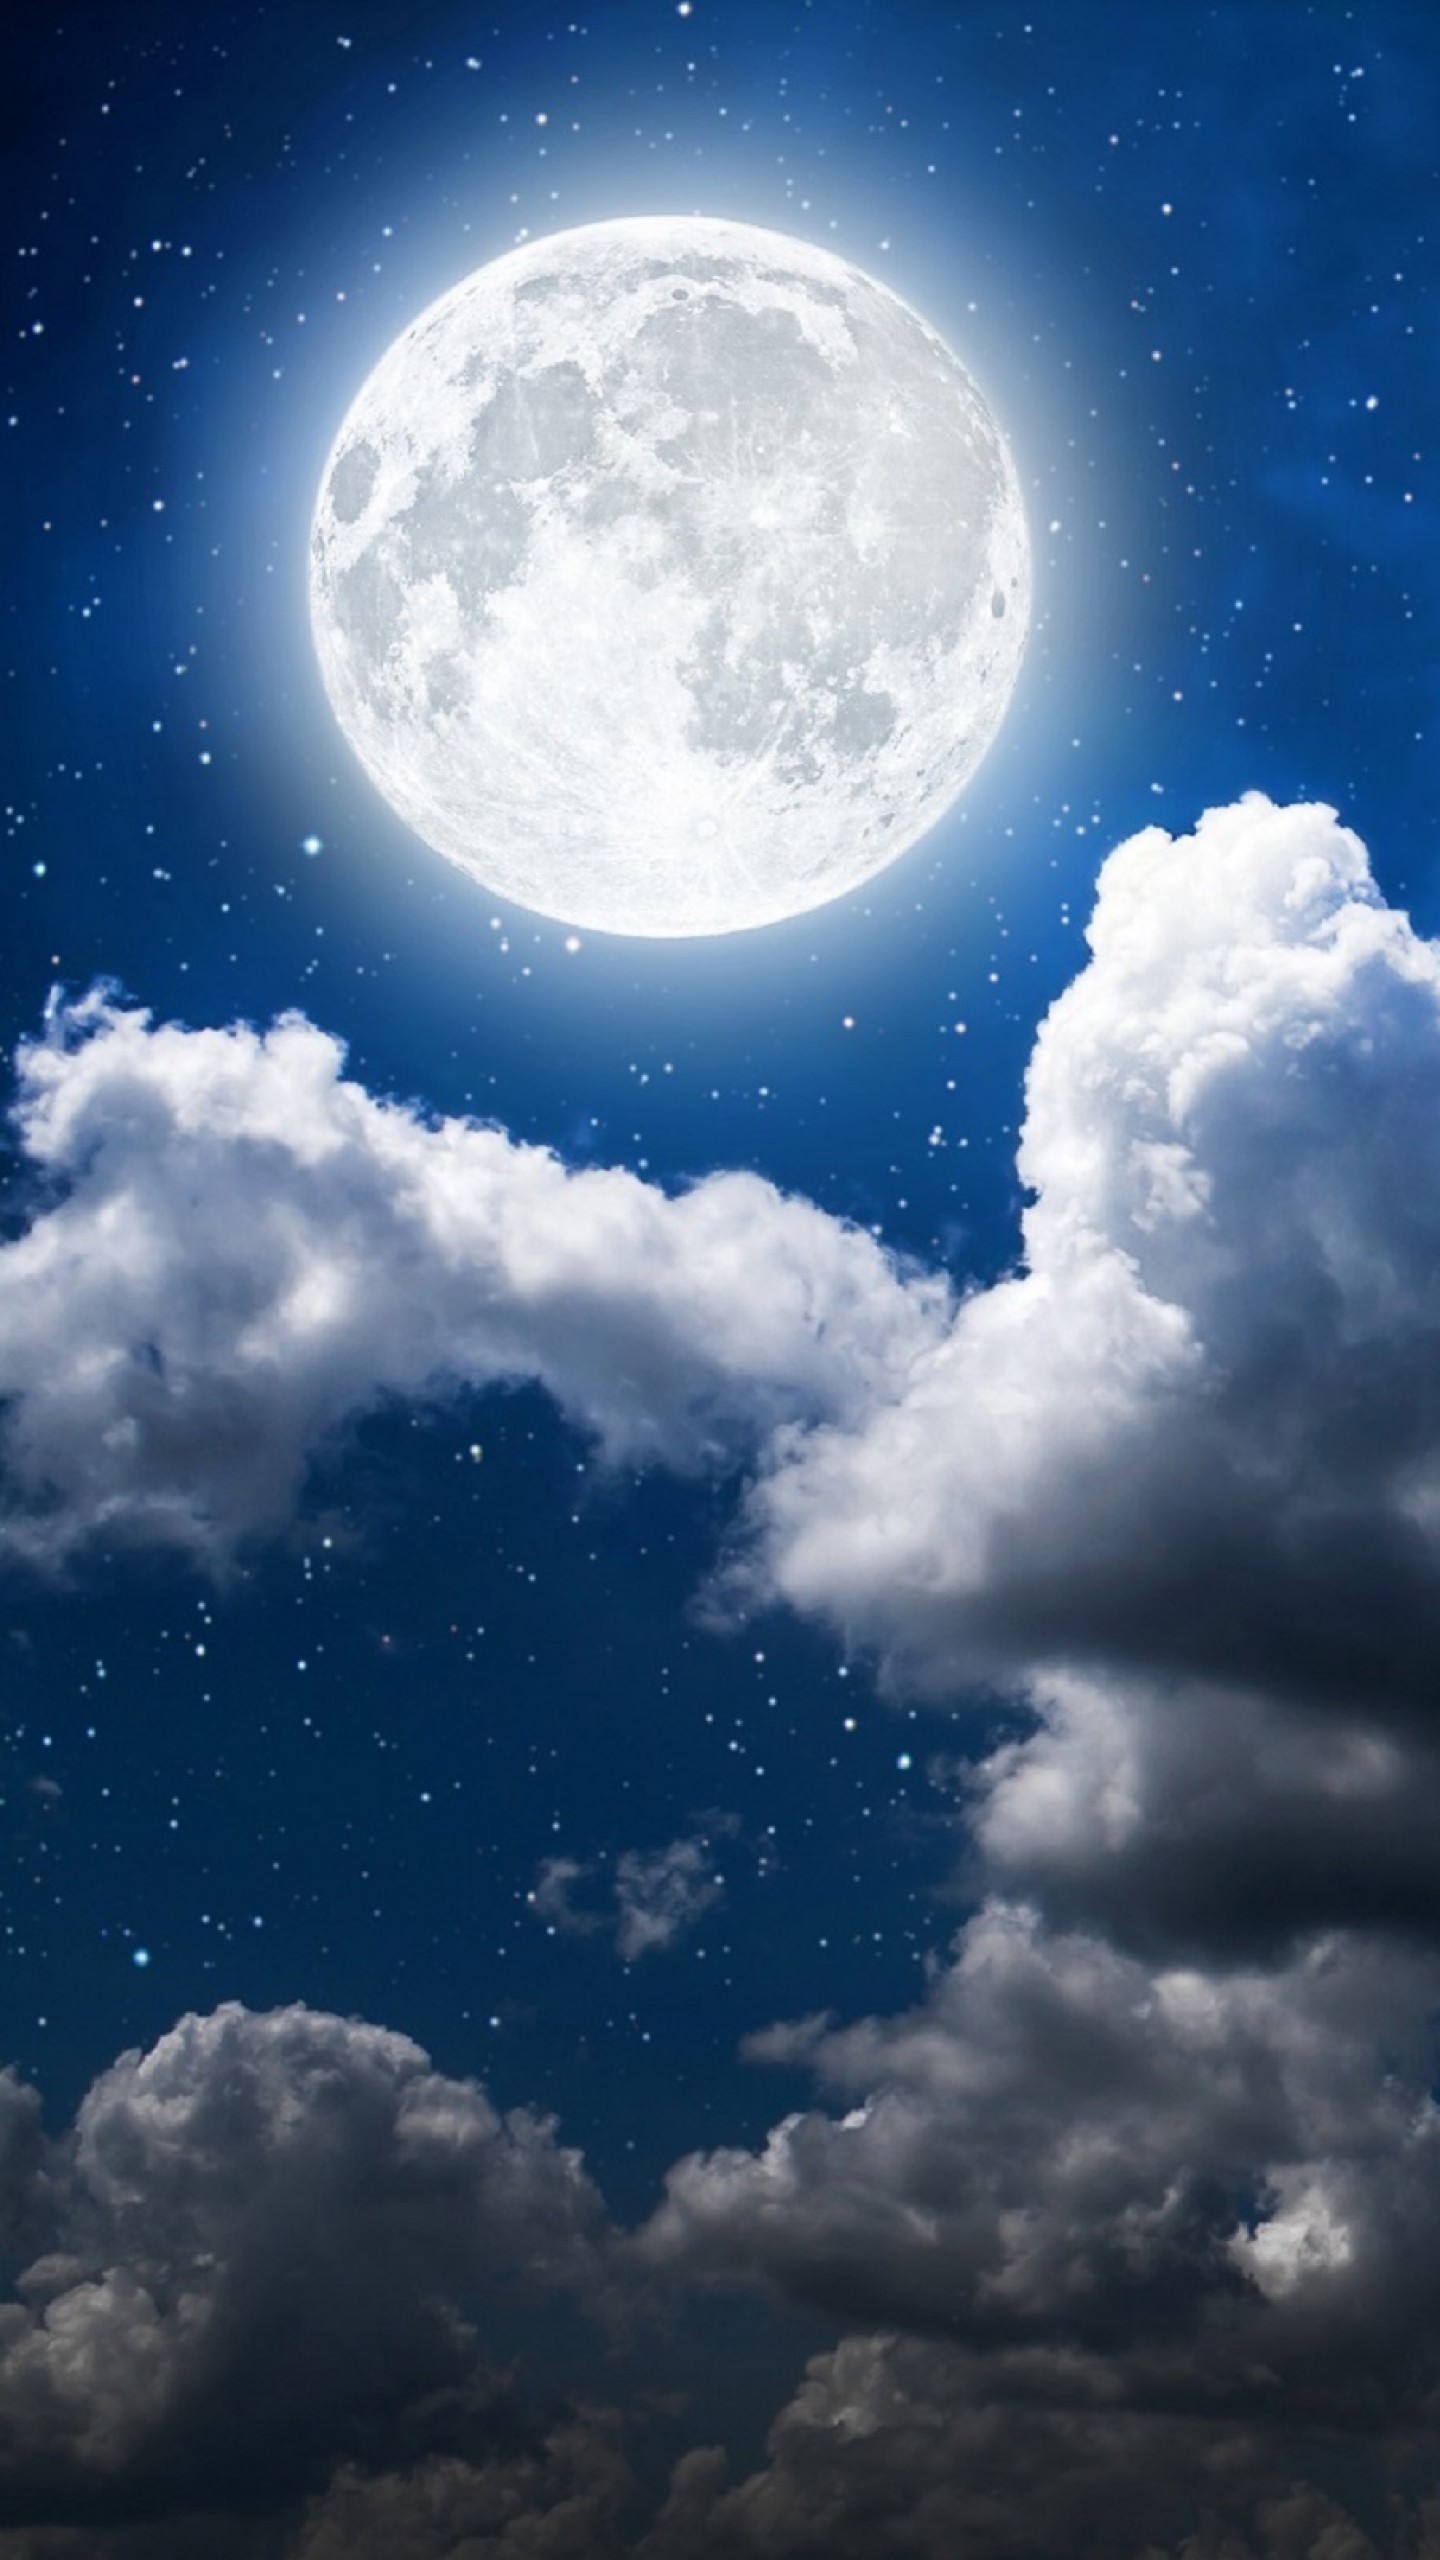 Clouds With Moon - HD Wallpaper 